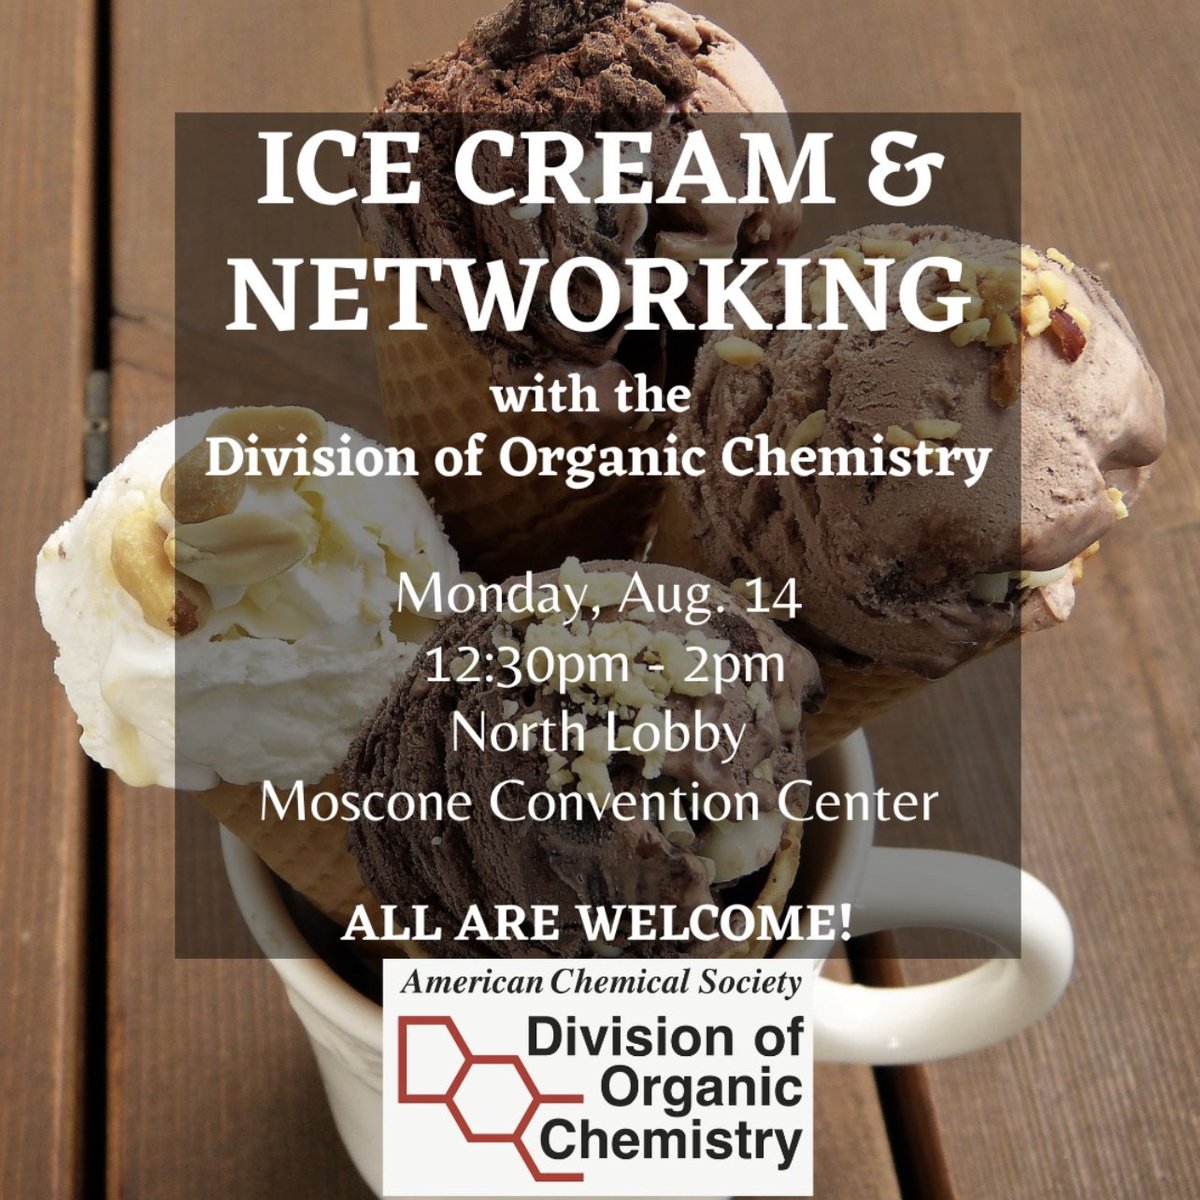 Ice Cream, Swag, and Networking with @ACSorganic -- see you today from 12:30-2pm in the Moscone North Lobby!